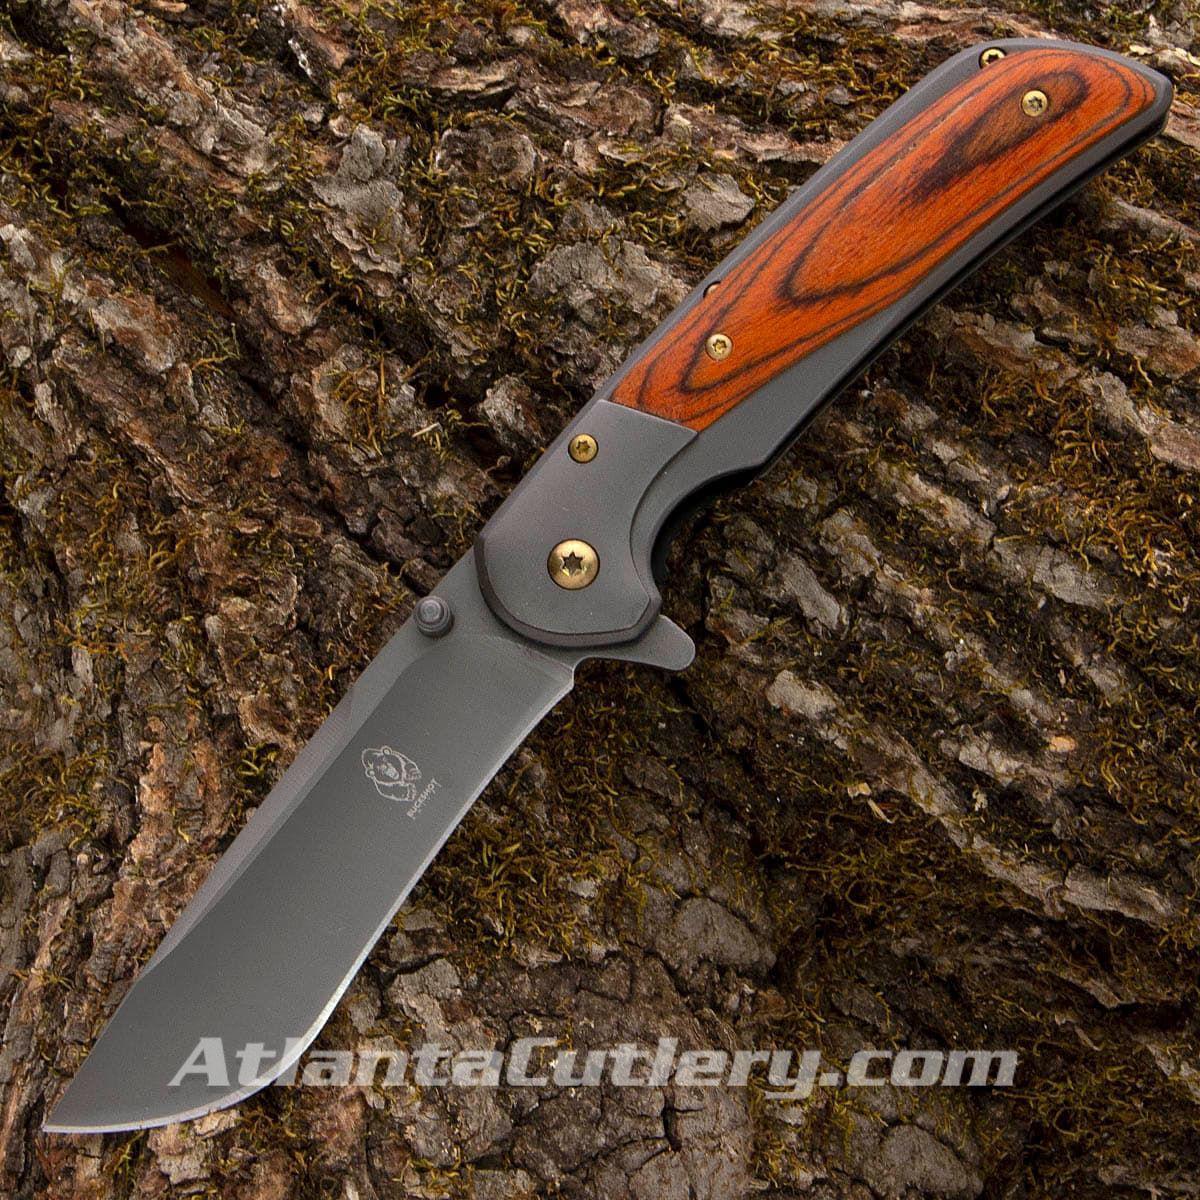 Buckshot Folder assisted opening knife with wood scales